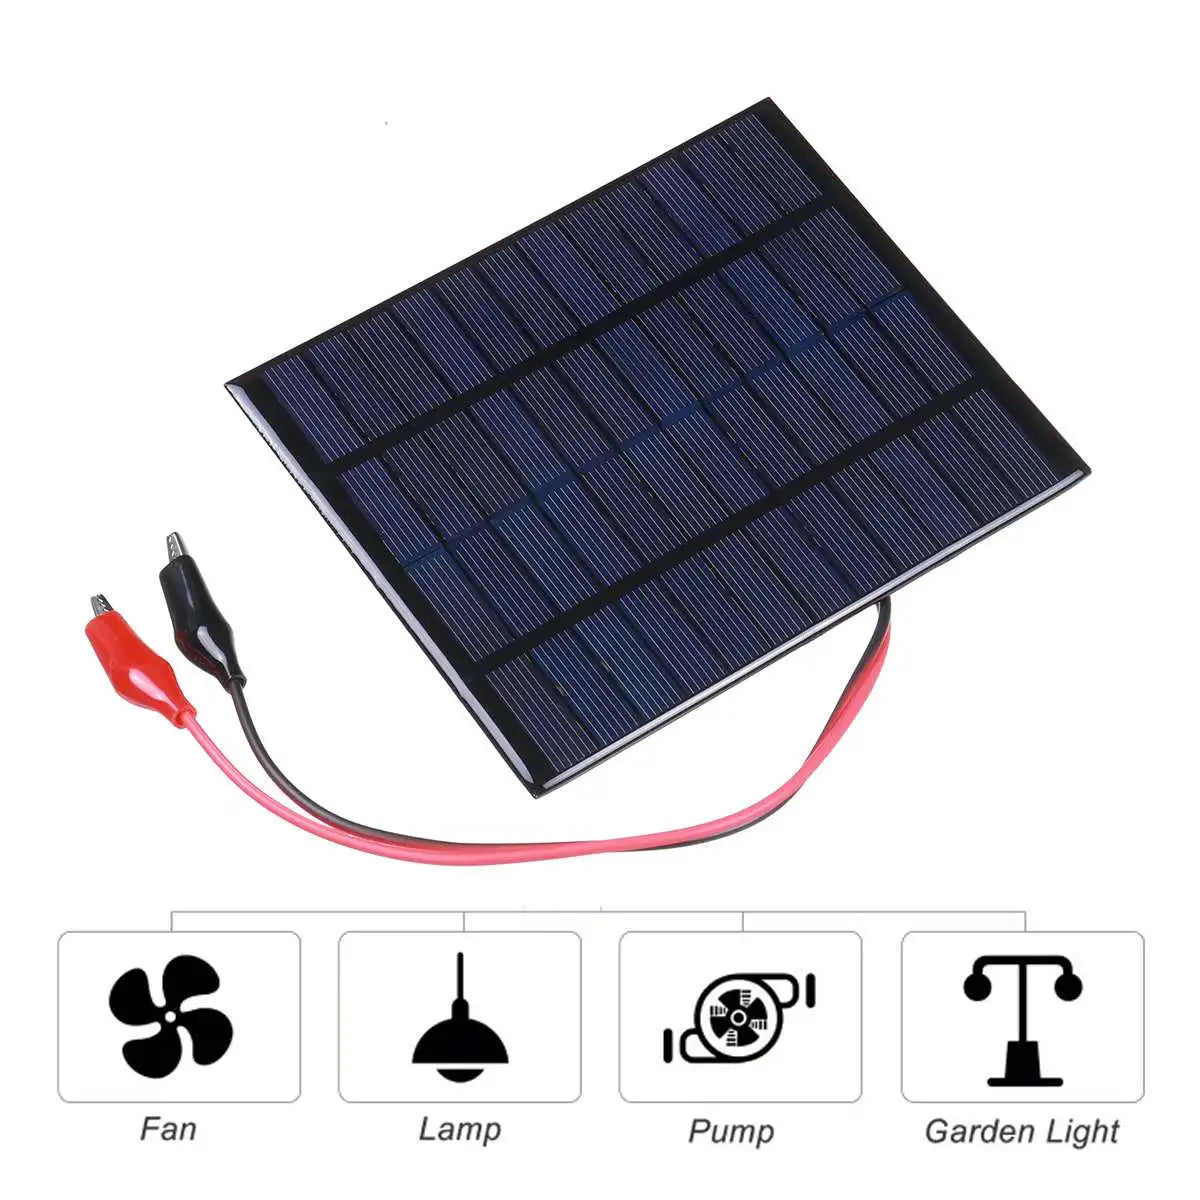 20W Solar Panel, Waterproof and durable polycrystalline silicon solar panel offers a long-lasting performance.